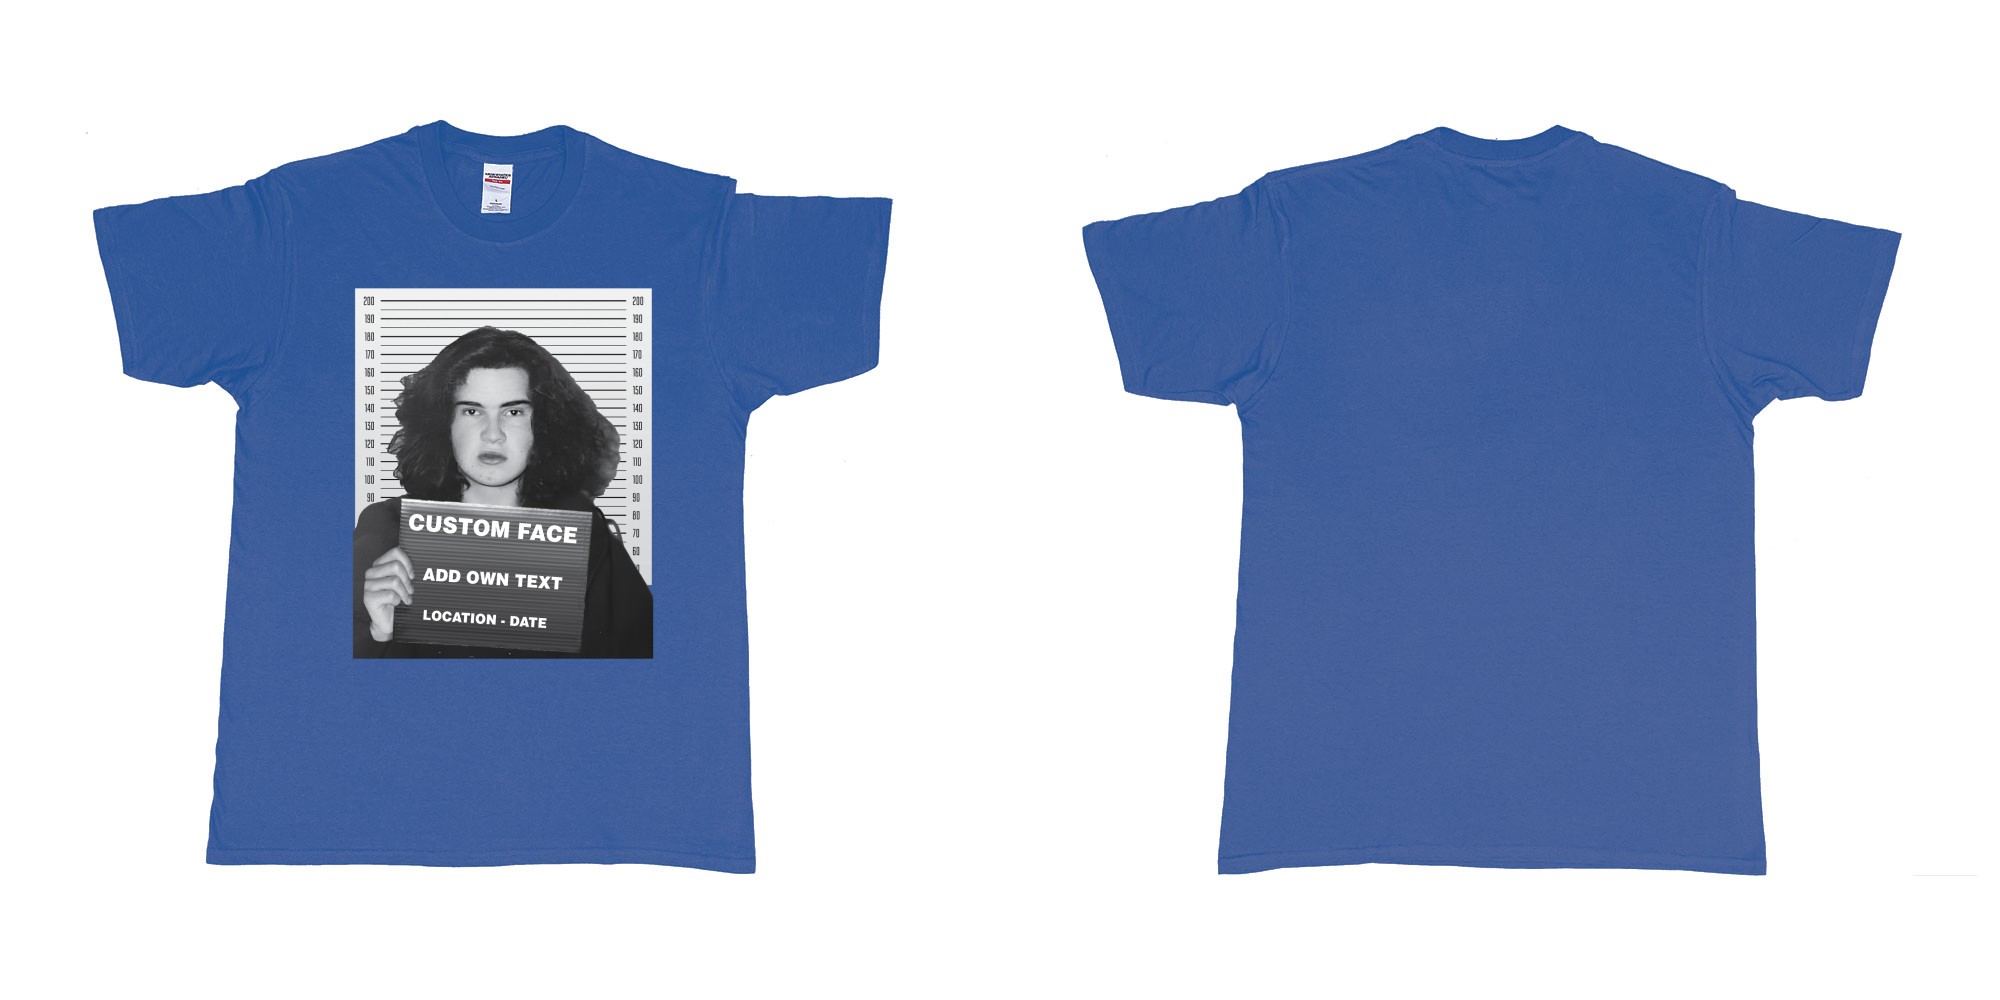 Custom tshirt design jimmy carr arrested bali mugshot in fabric color royal-blue choice your own text made in Bali by The Pirate Way